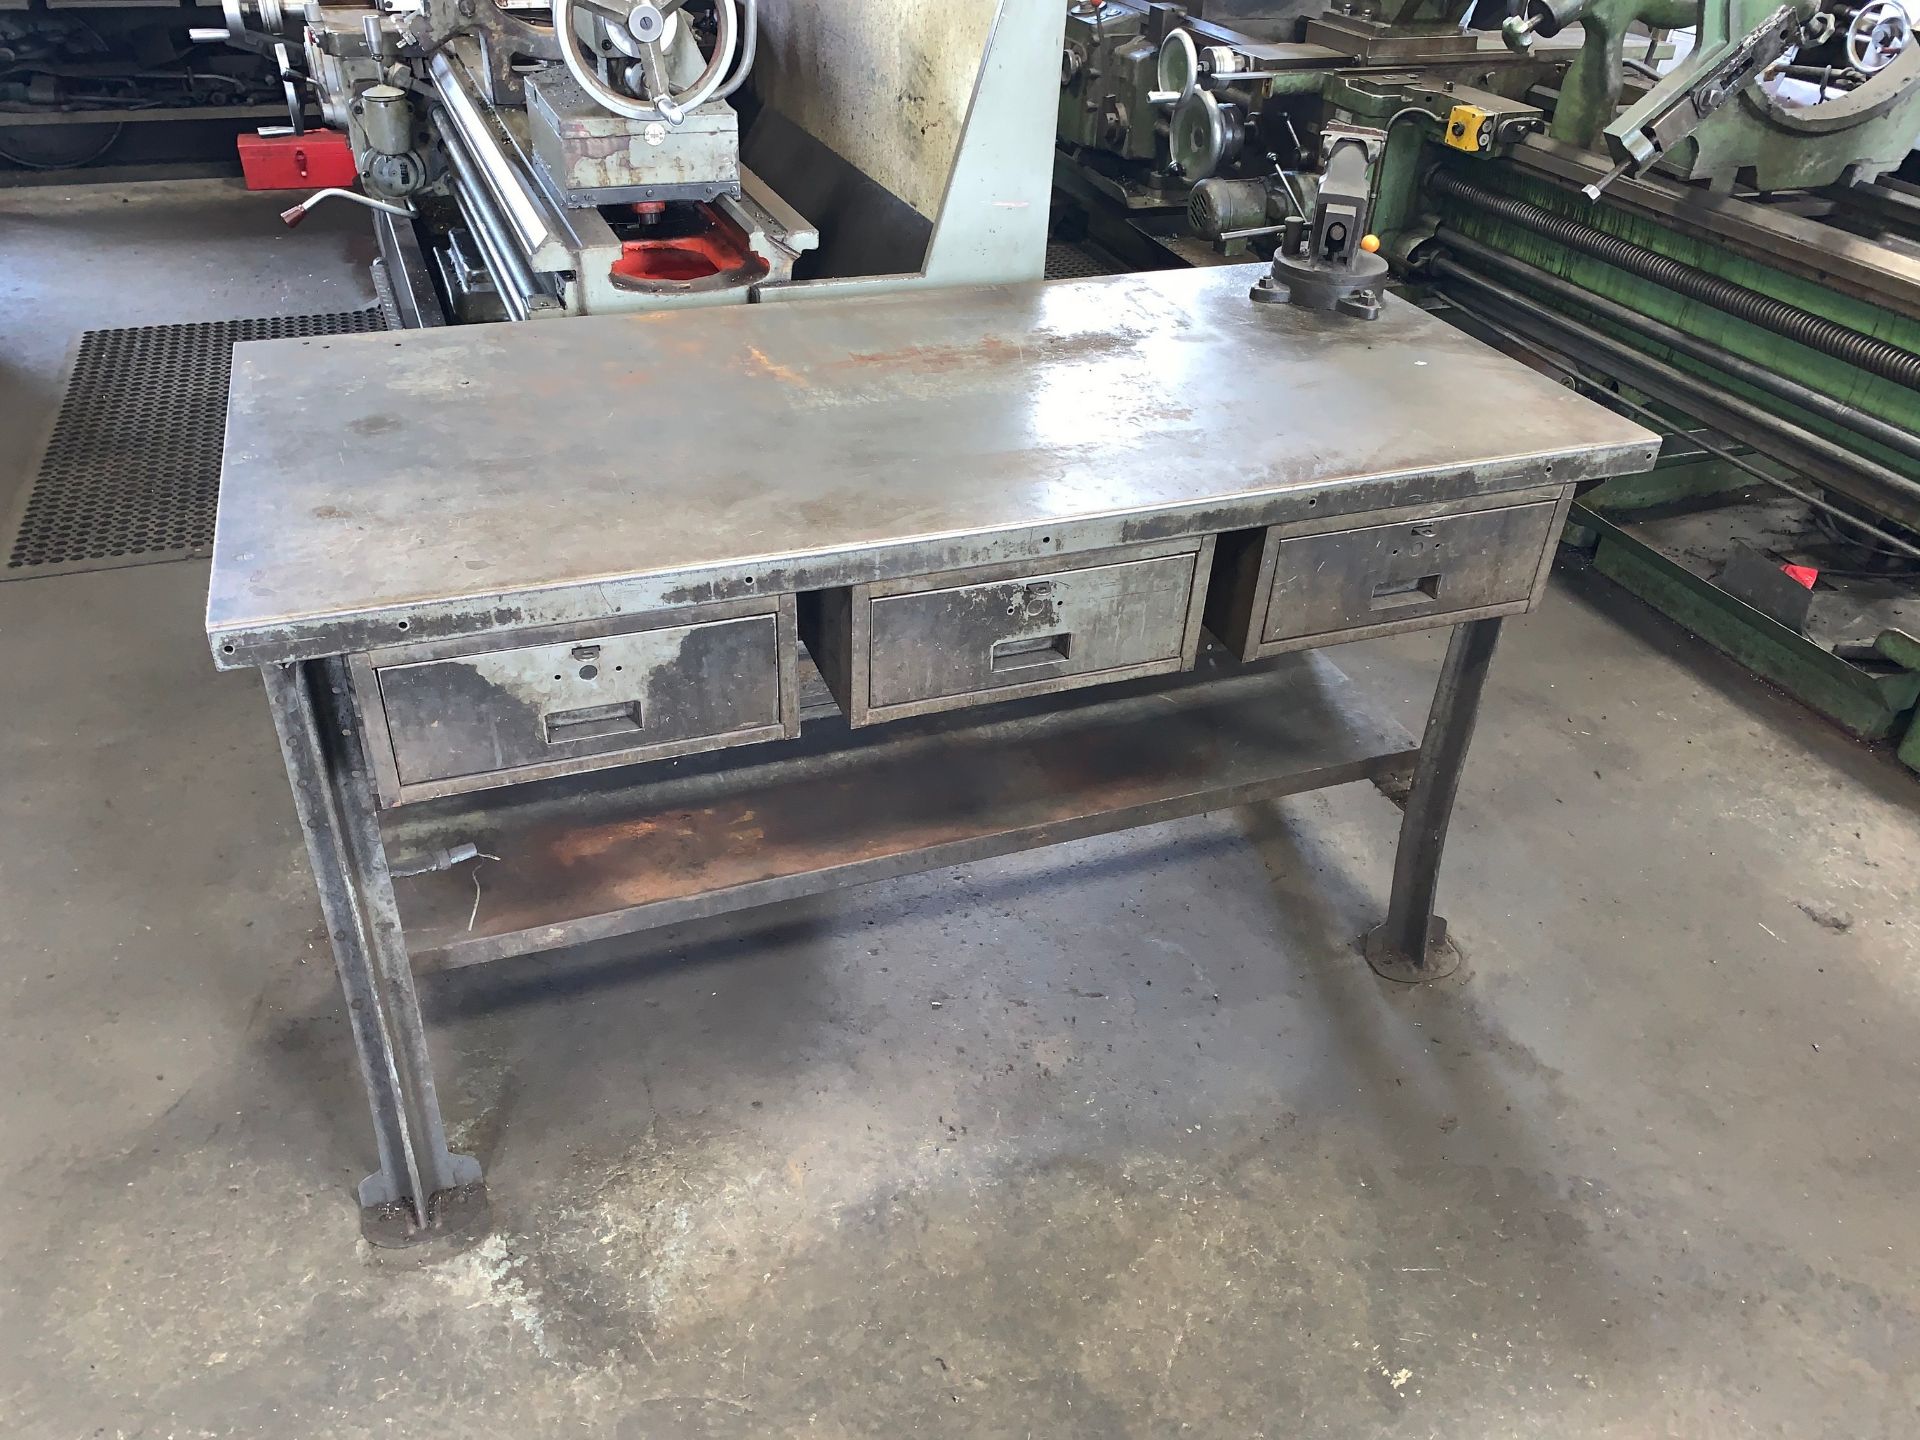 Metal Work Bench, 3-Drawers, Electrical Outlet, 28" x 60" with Morgan Chicago 3" Bench Vise (Buyer